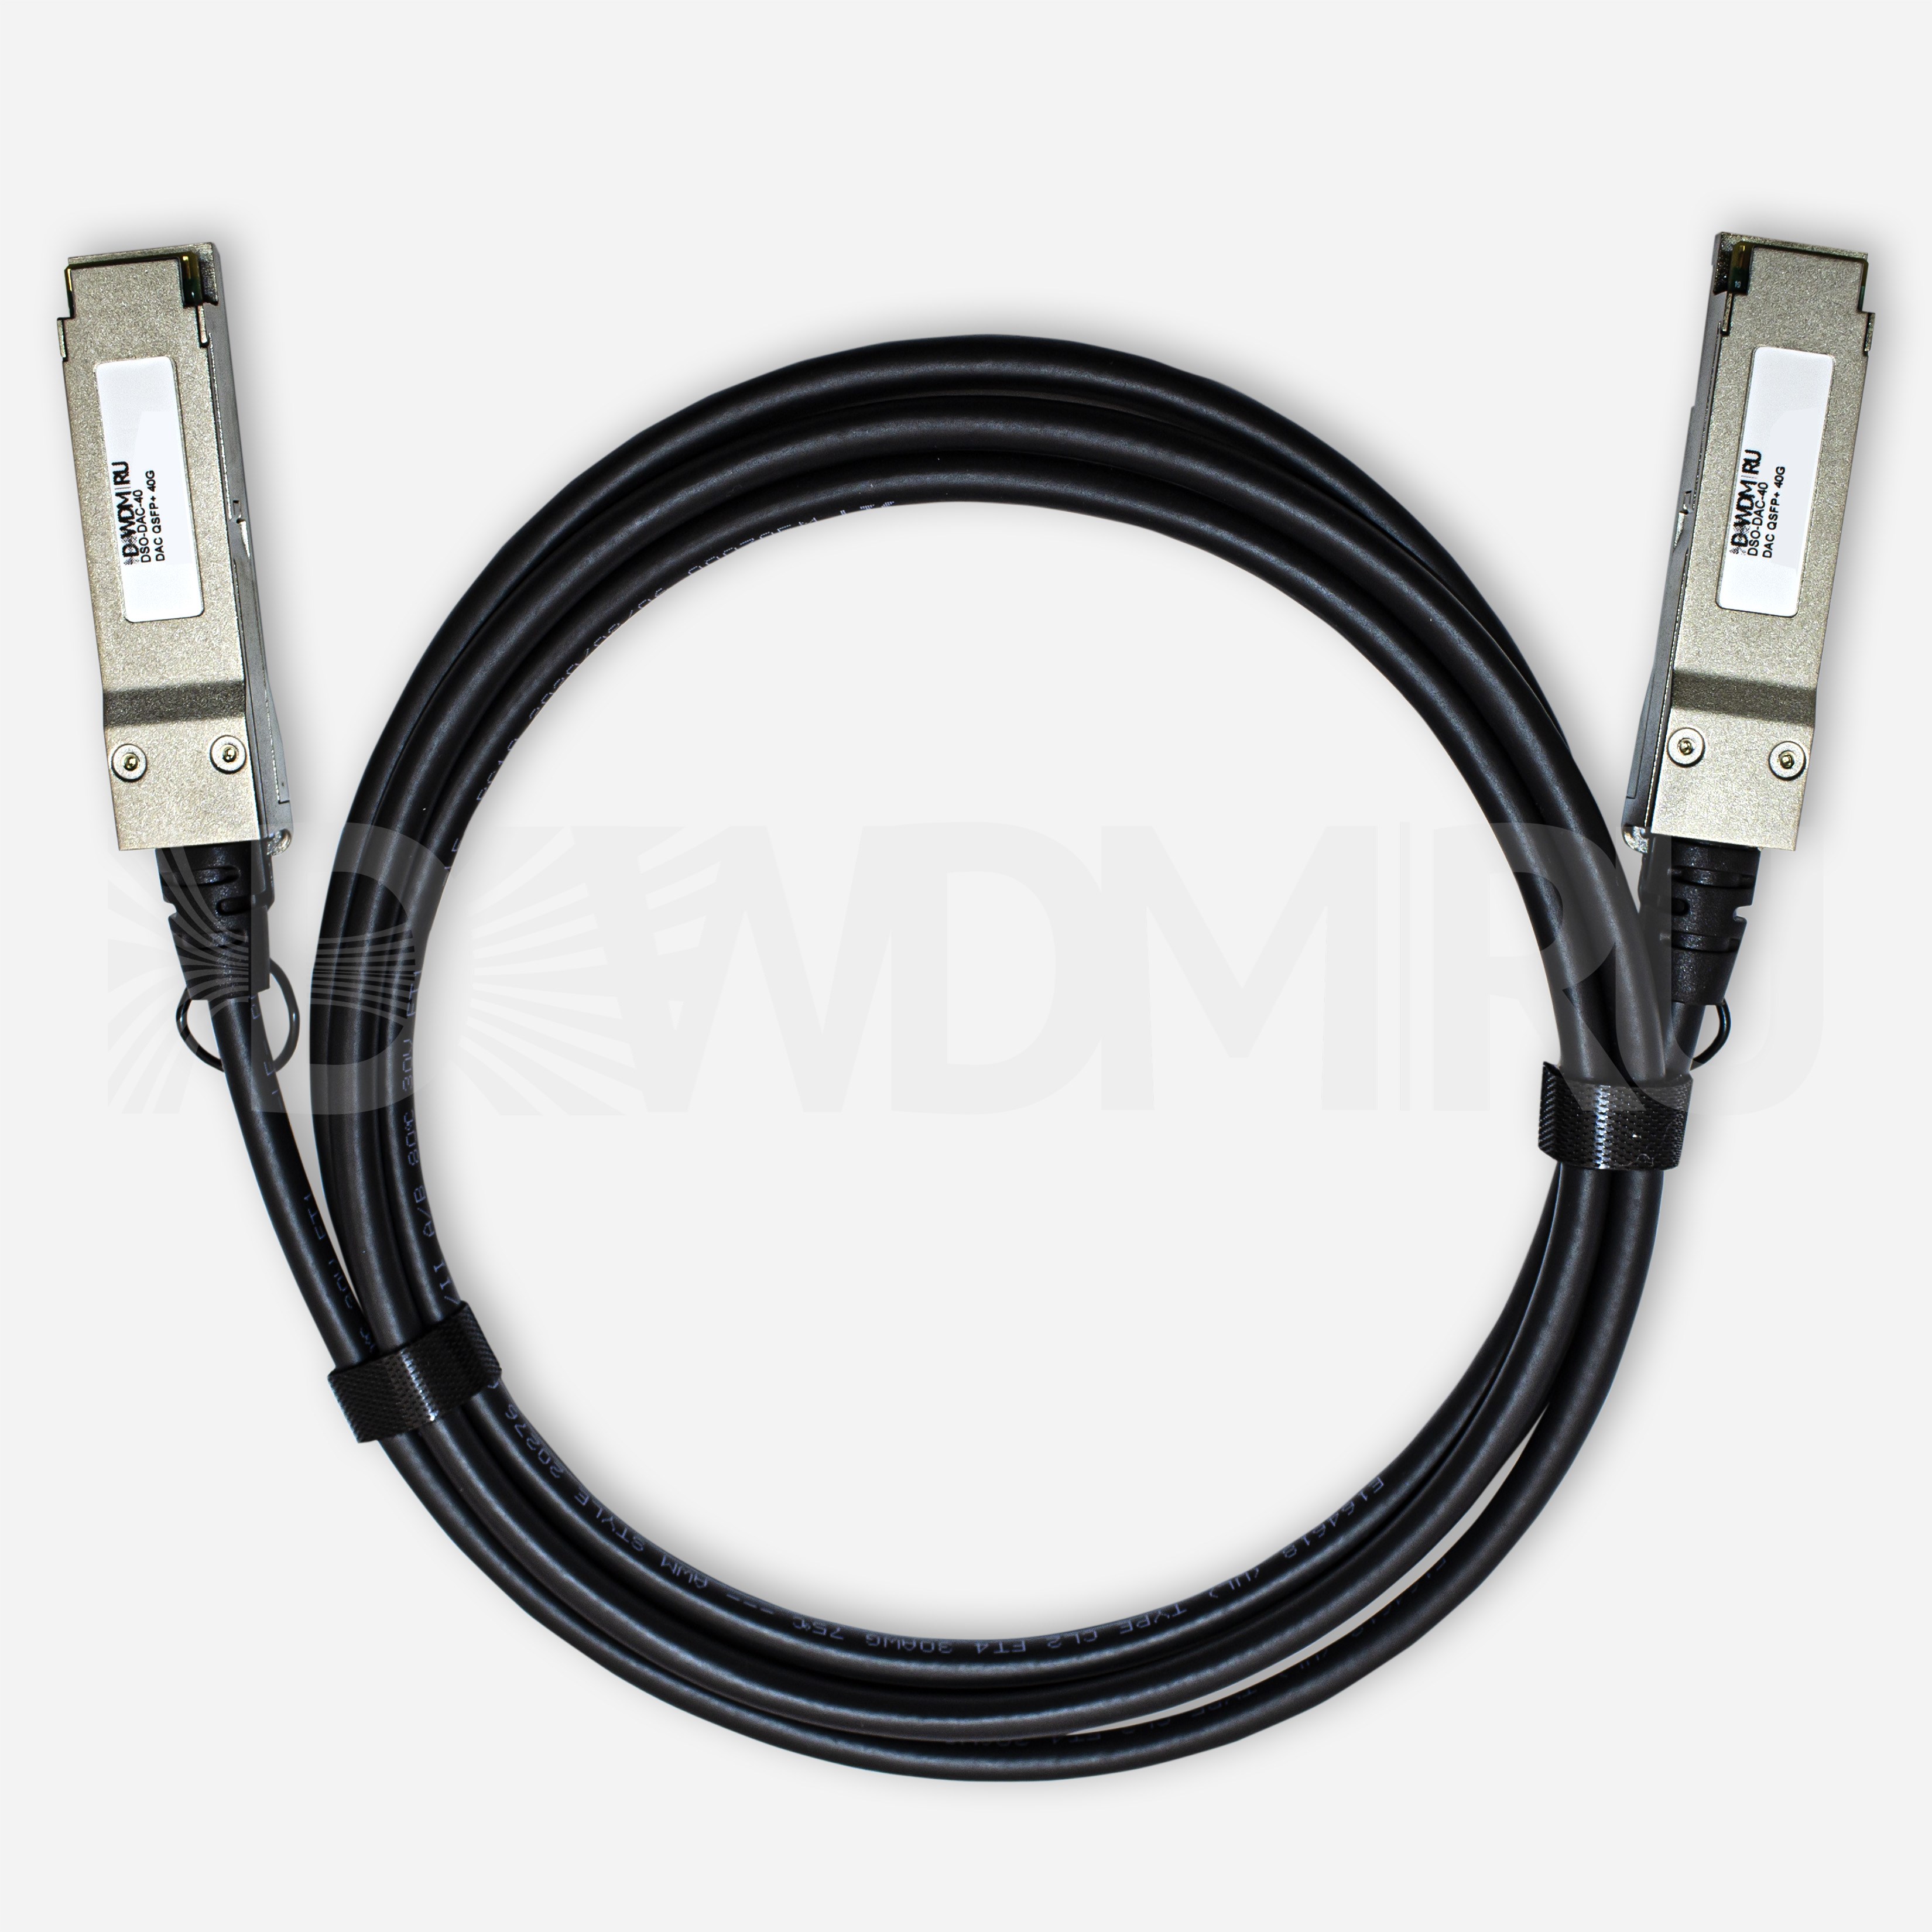 Кабель Direct Attached, QSFP+, 30AWG, 40 Гб/с, 1 м - ДВДМ.РУ (DSO-DAC-40-1)